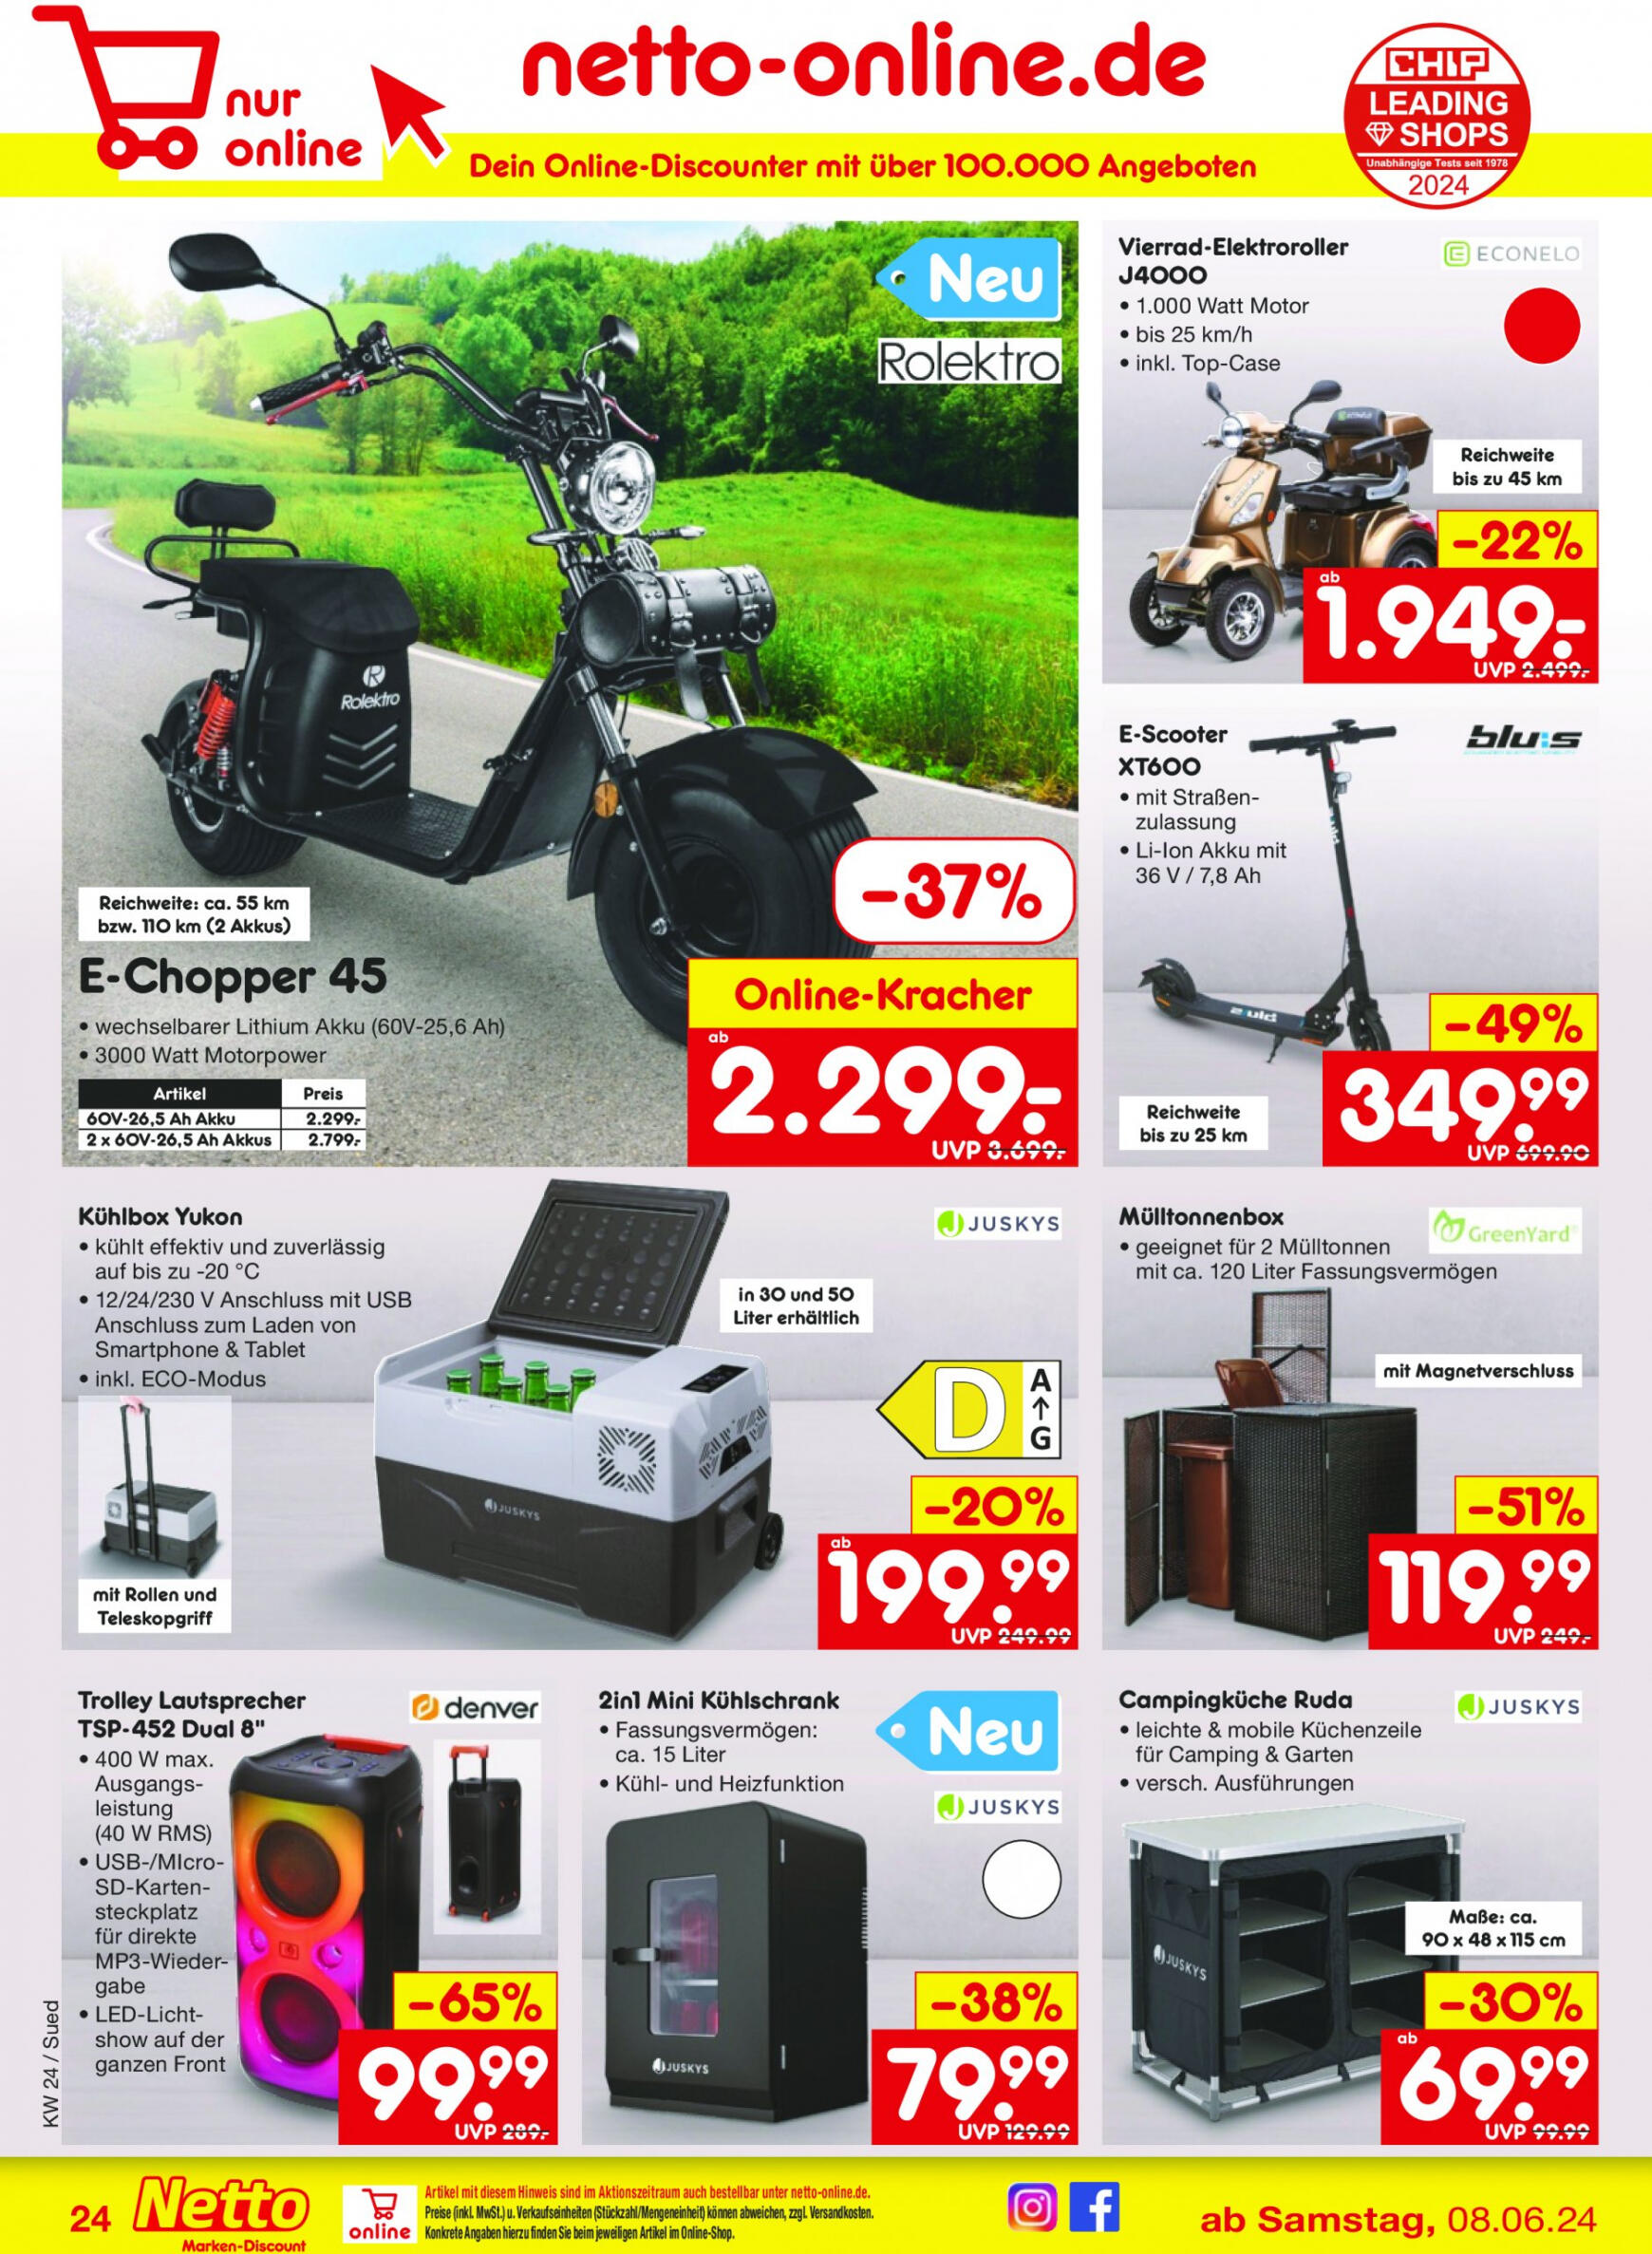 netto - Flyer Netto aktuell 10.06. - 15.06. - page: 38